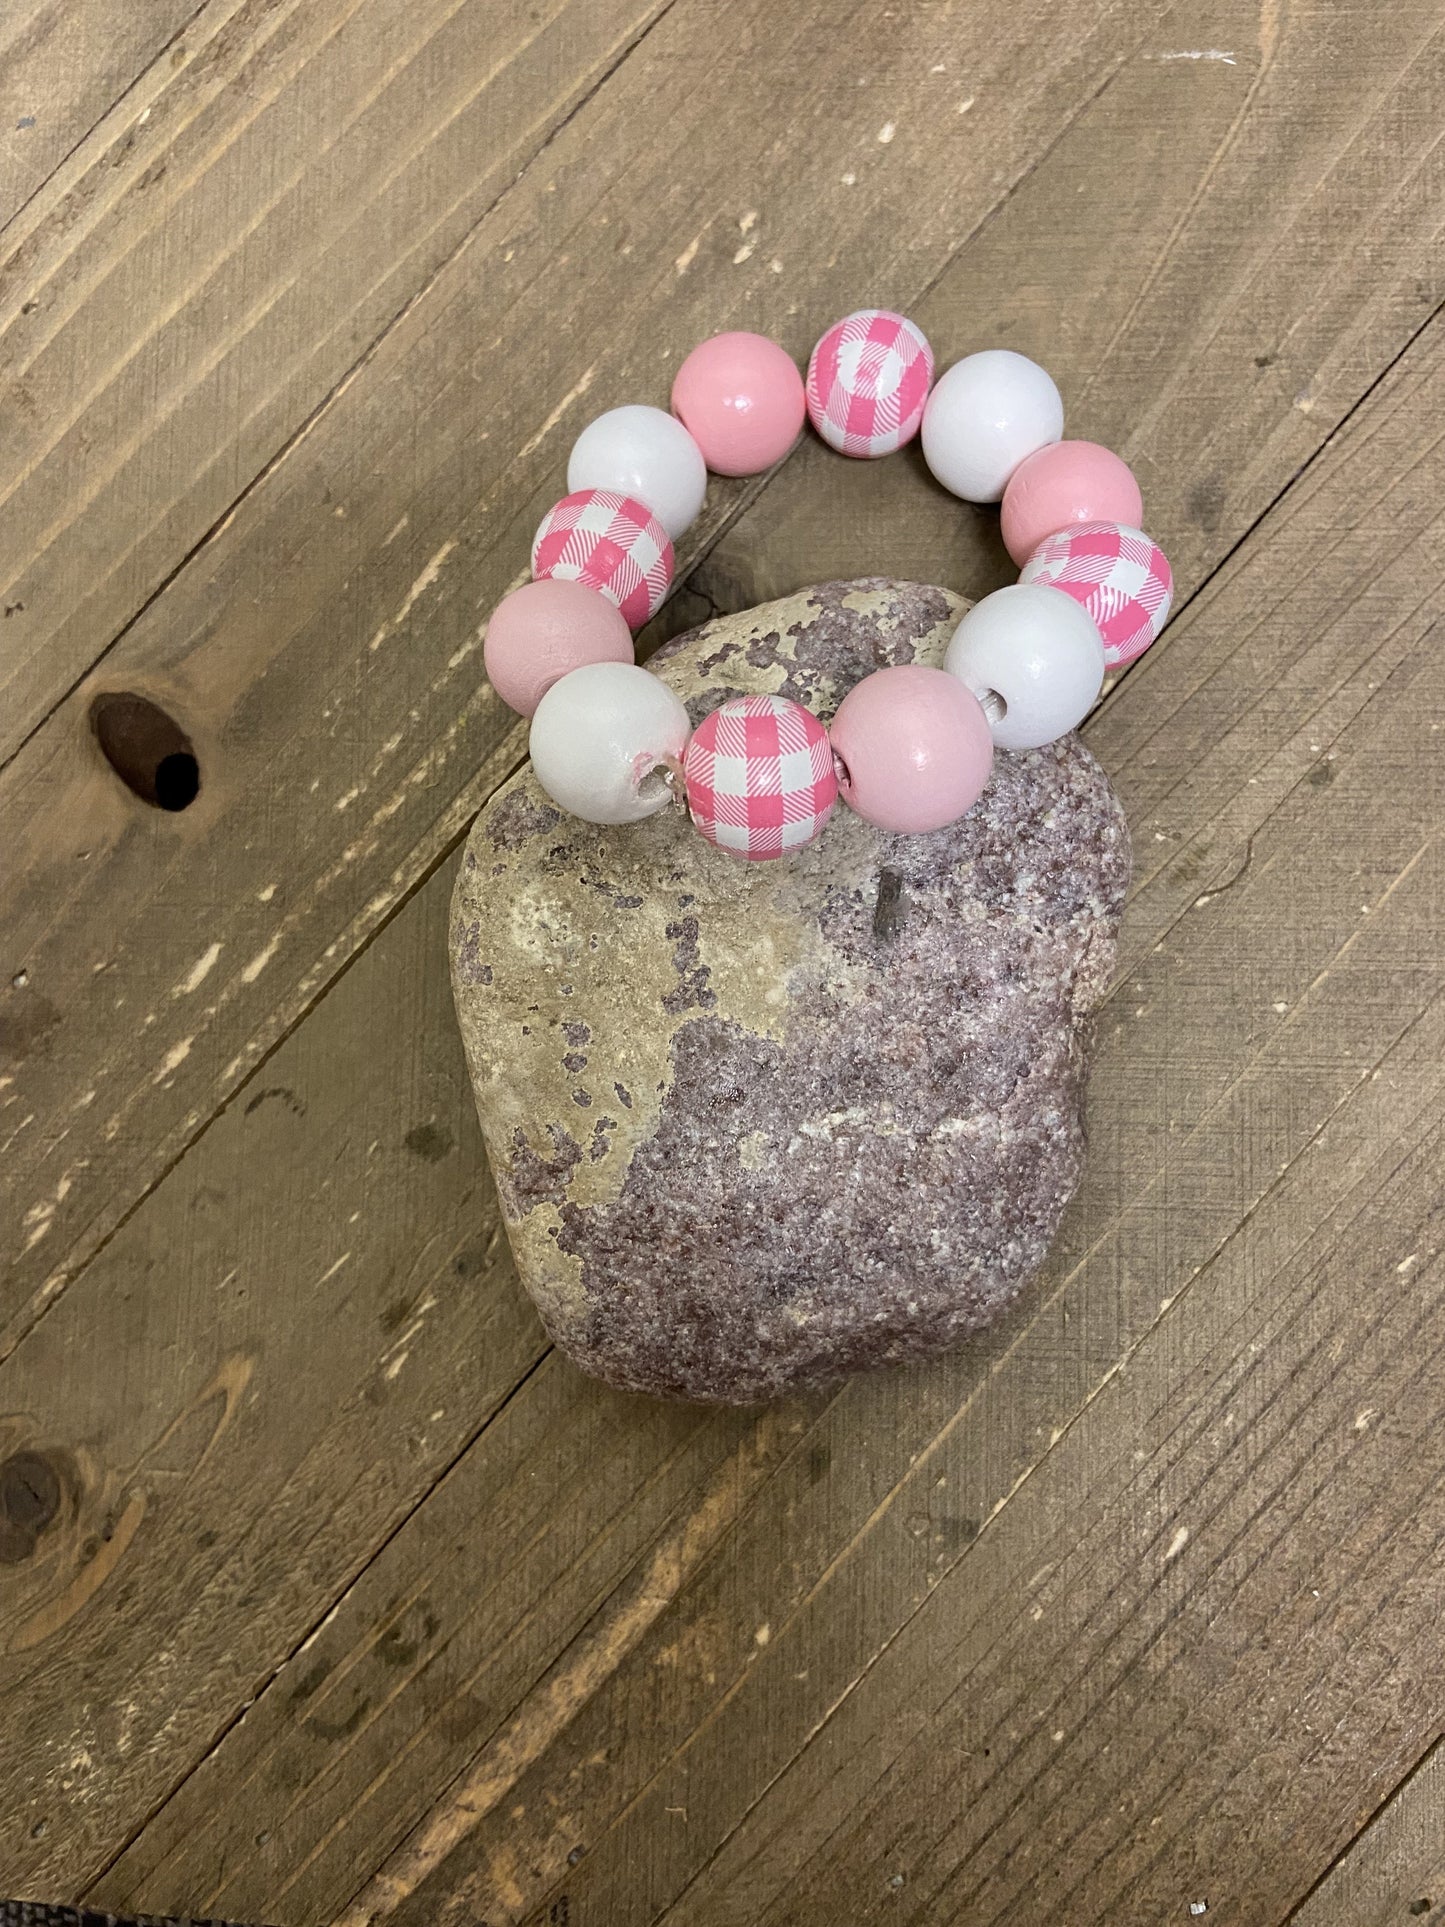 Pretty in Pink -- Round Wooden Beaded Elastic/Stretch Bracelet